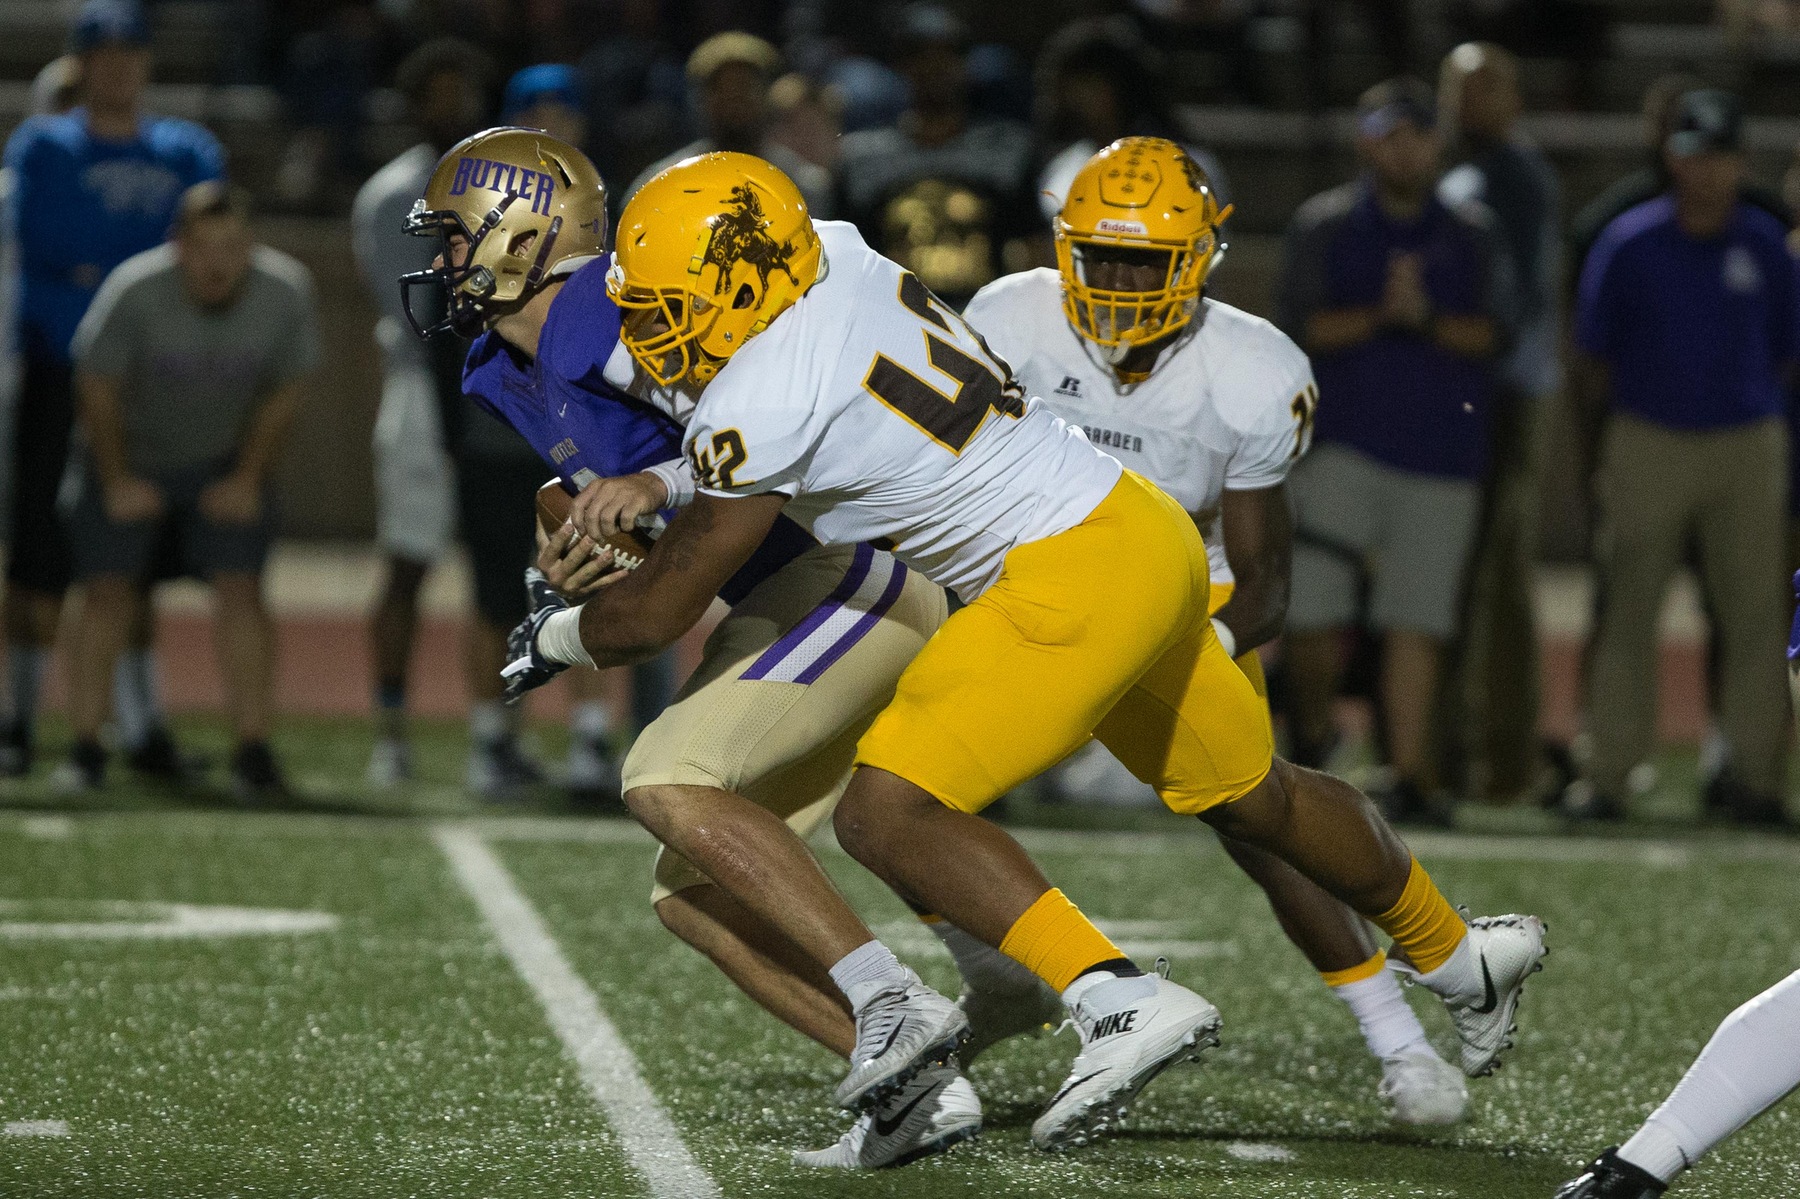 Broncbusters earn historic win on the back of their defense